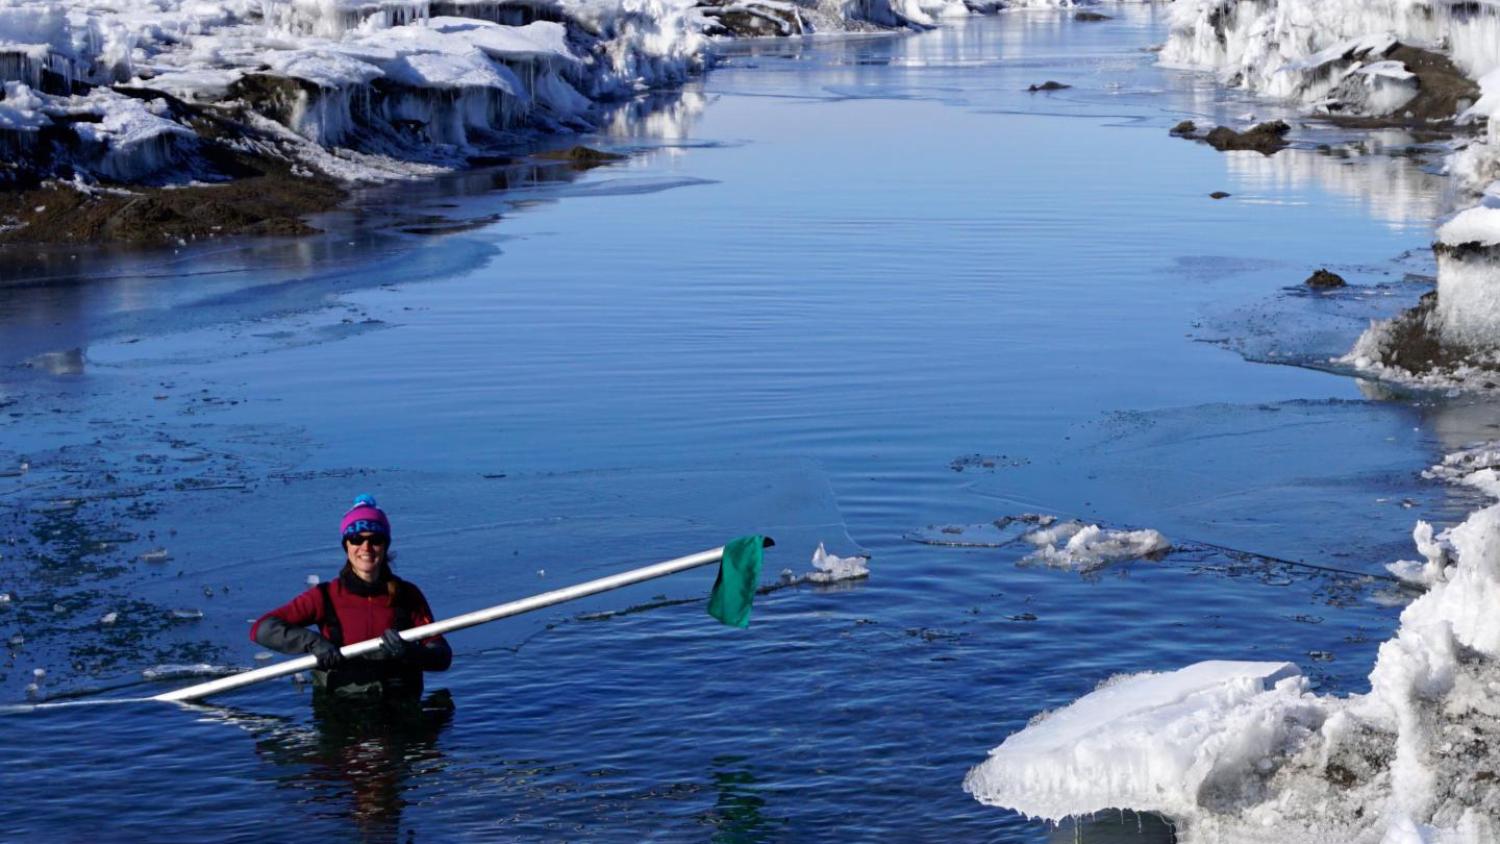 Alison Banwell wades through a meltwater pond in Antarctica